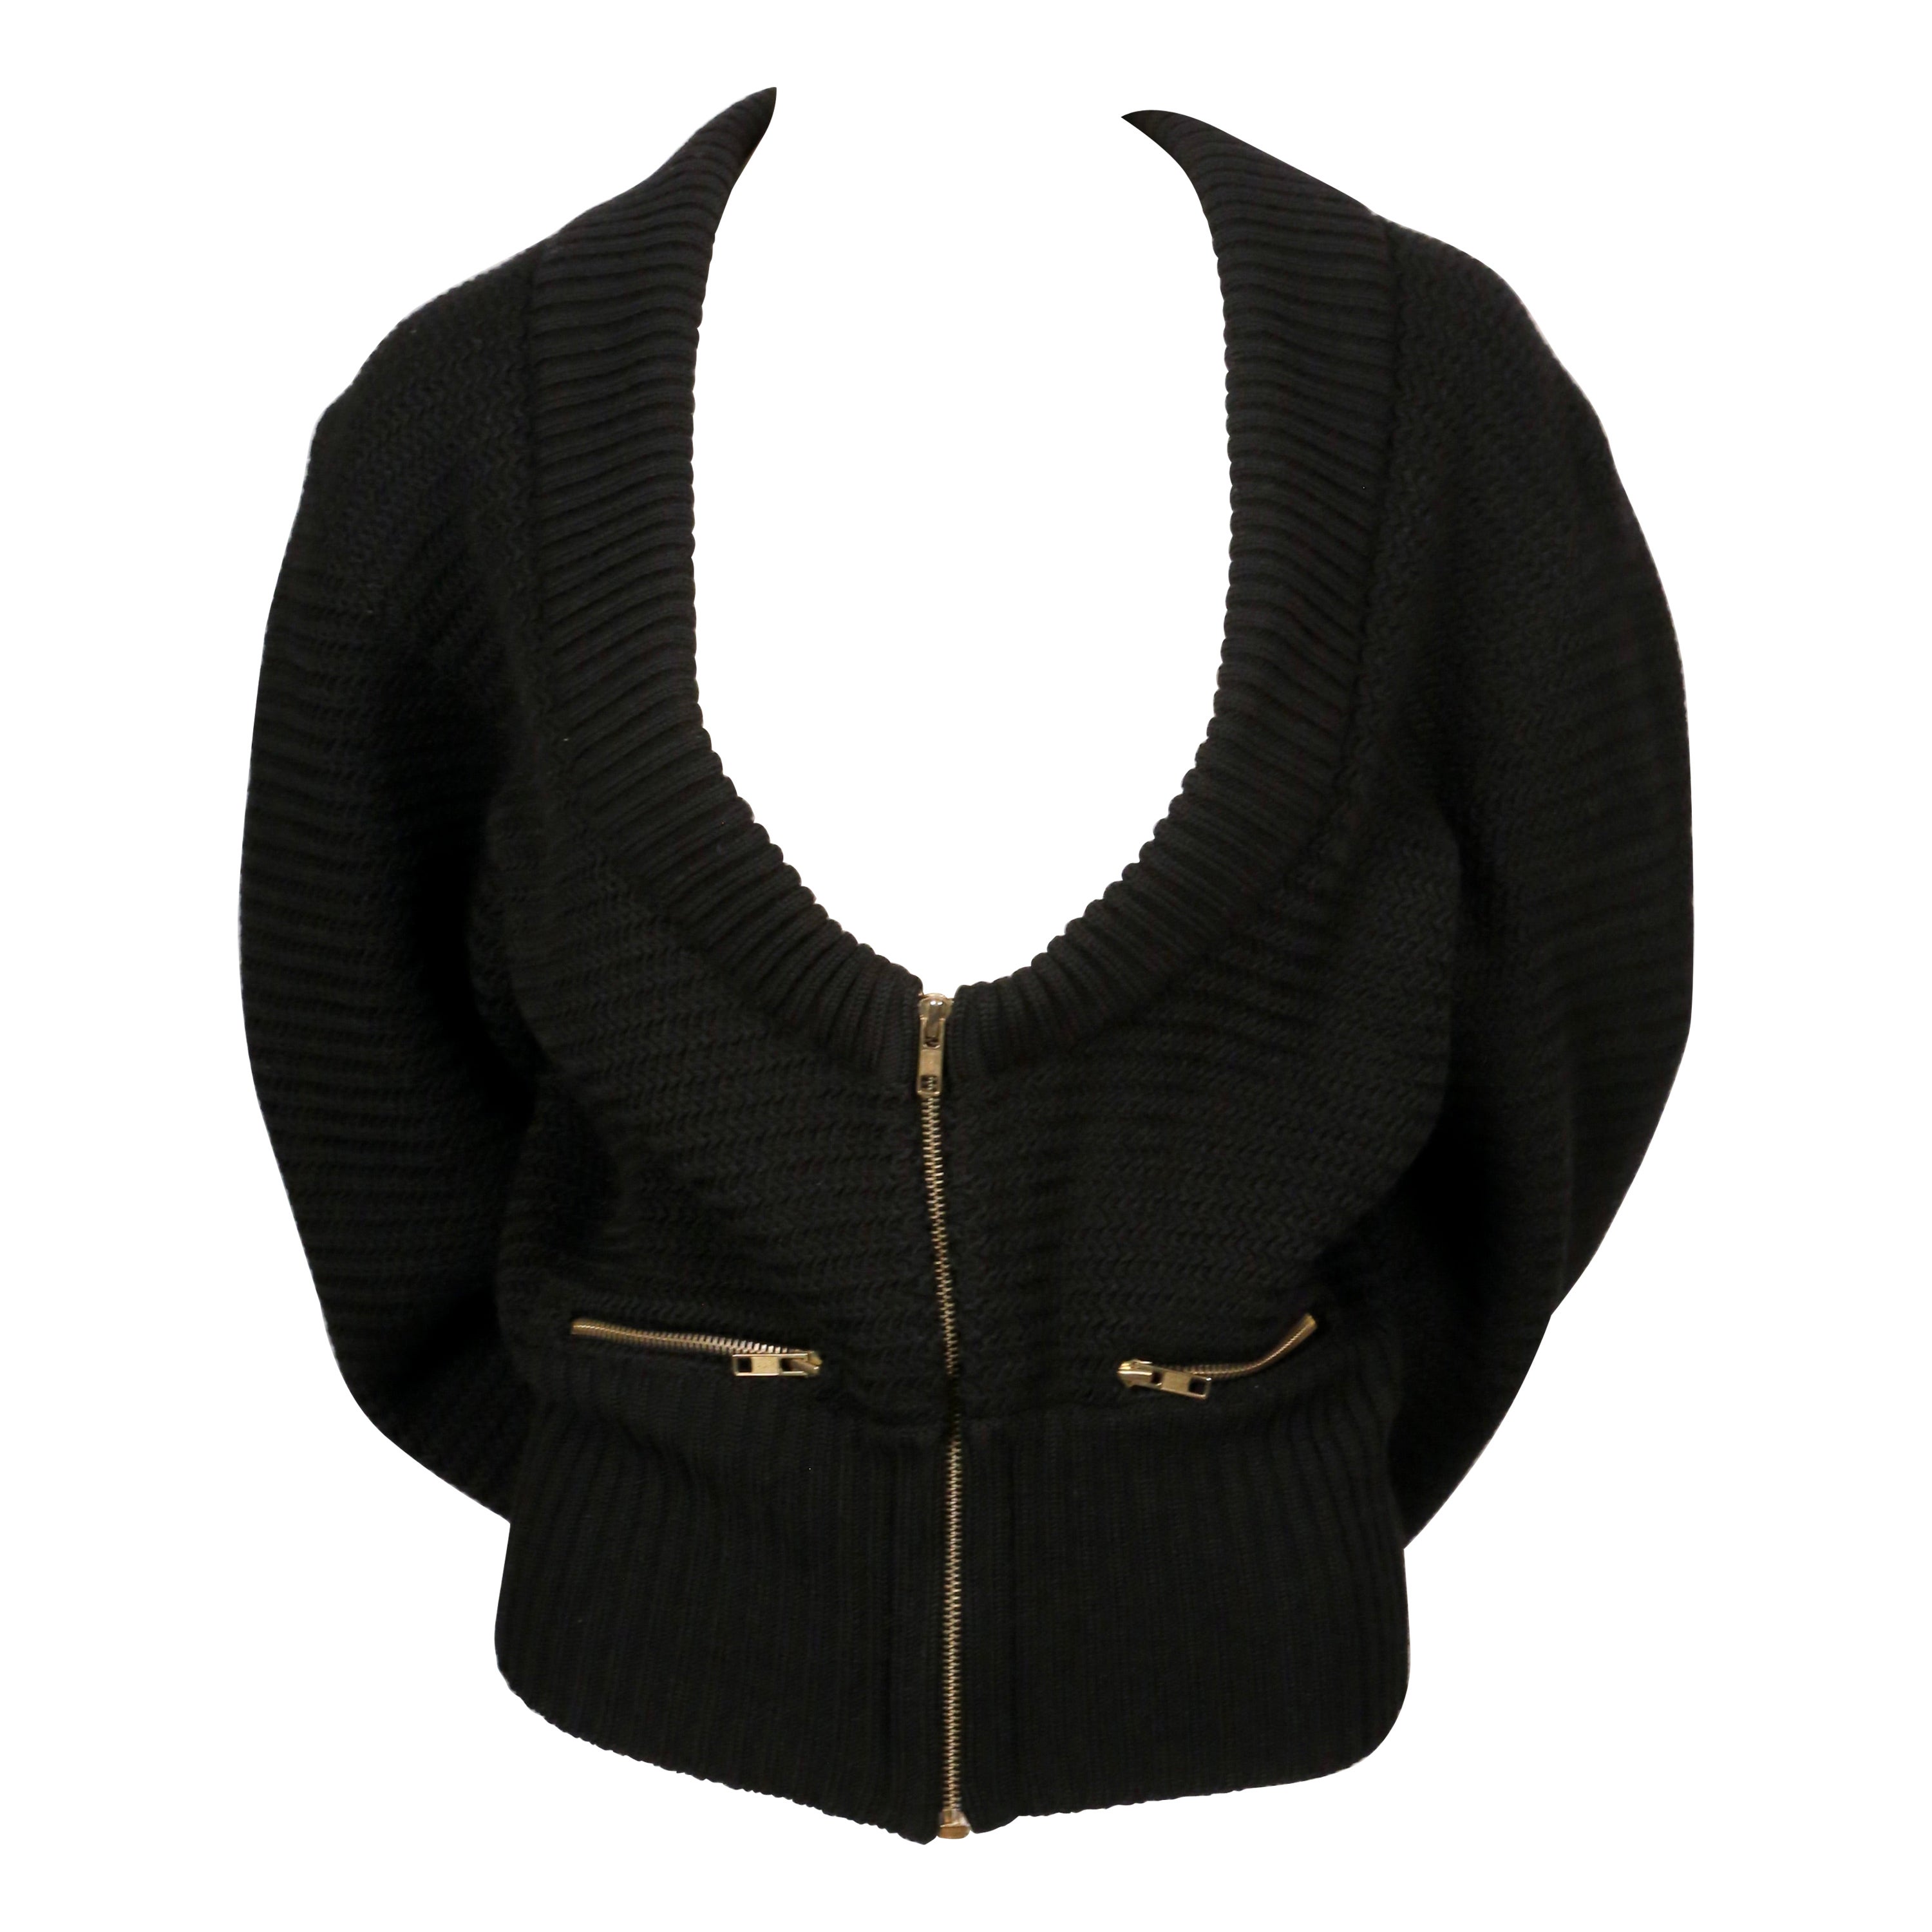 1986 AZZEDINE ALAIA heavy knit black RUNWAY cardigan sweater coat with zippers For Sale